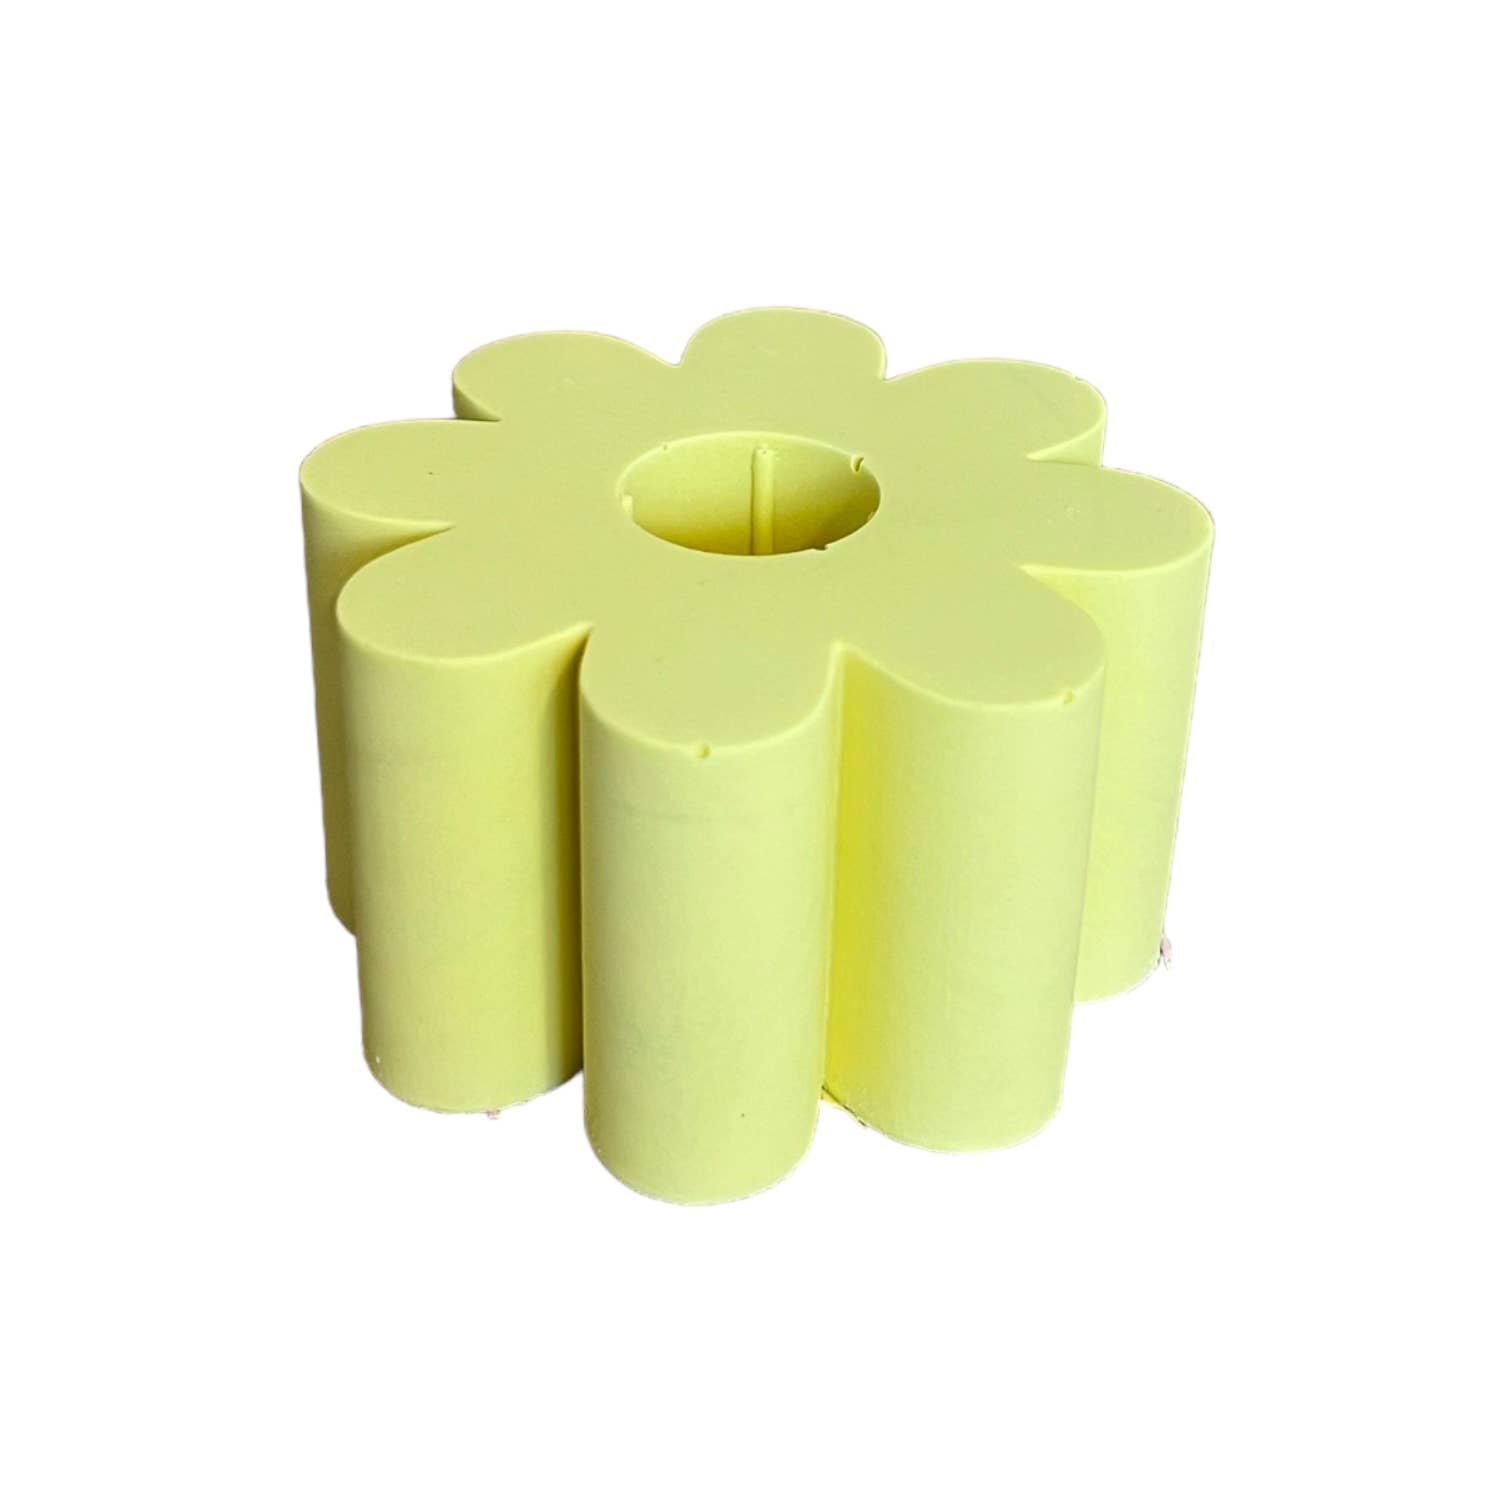 Yellow Flower Candle Holder